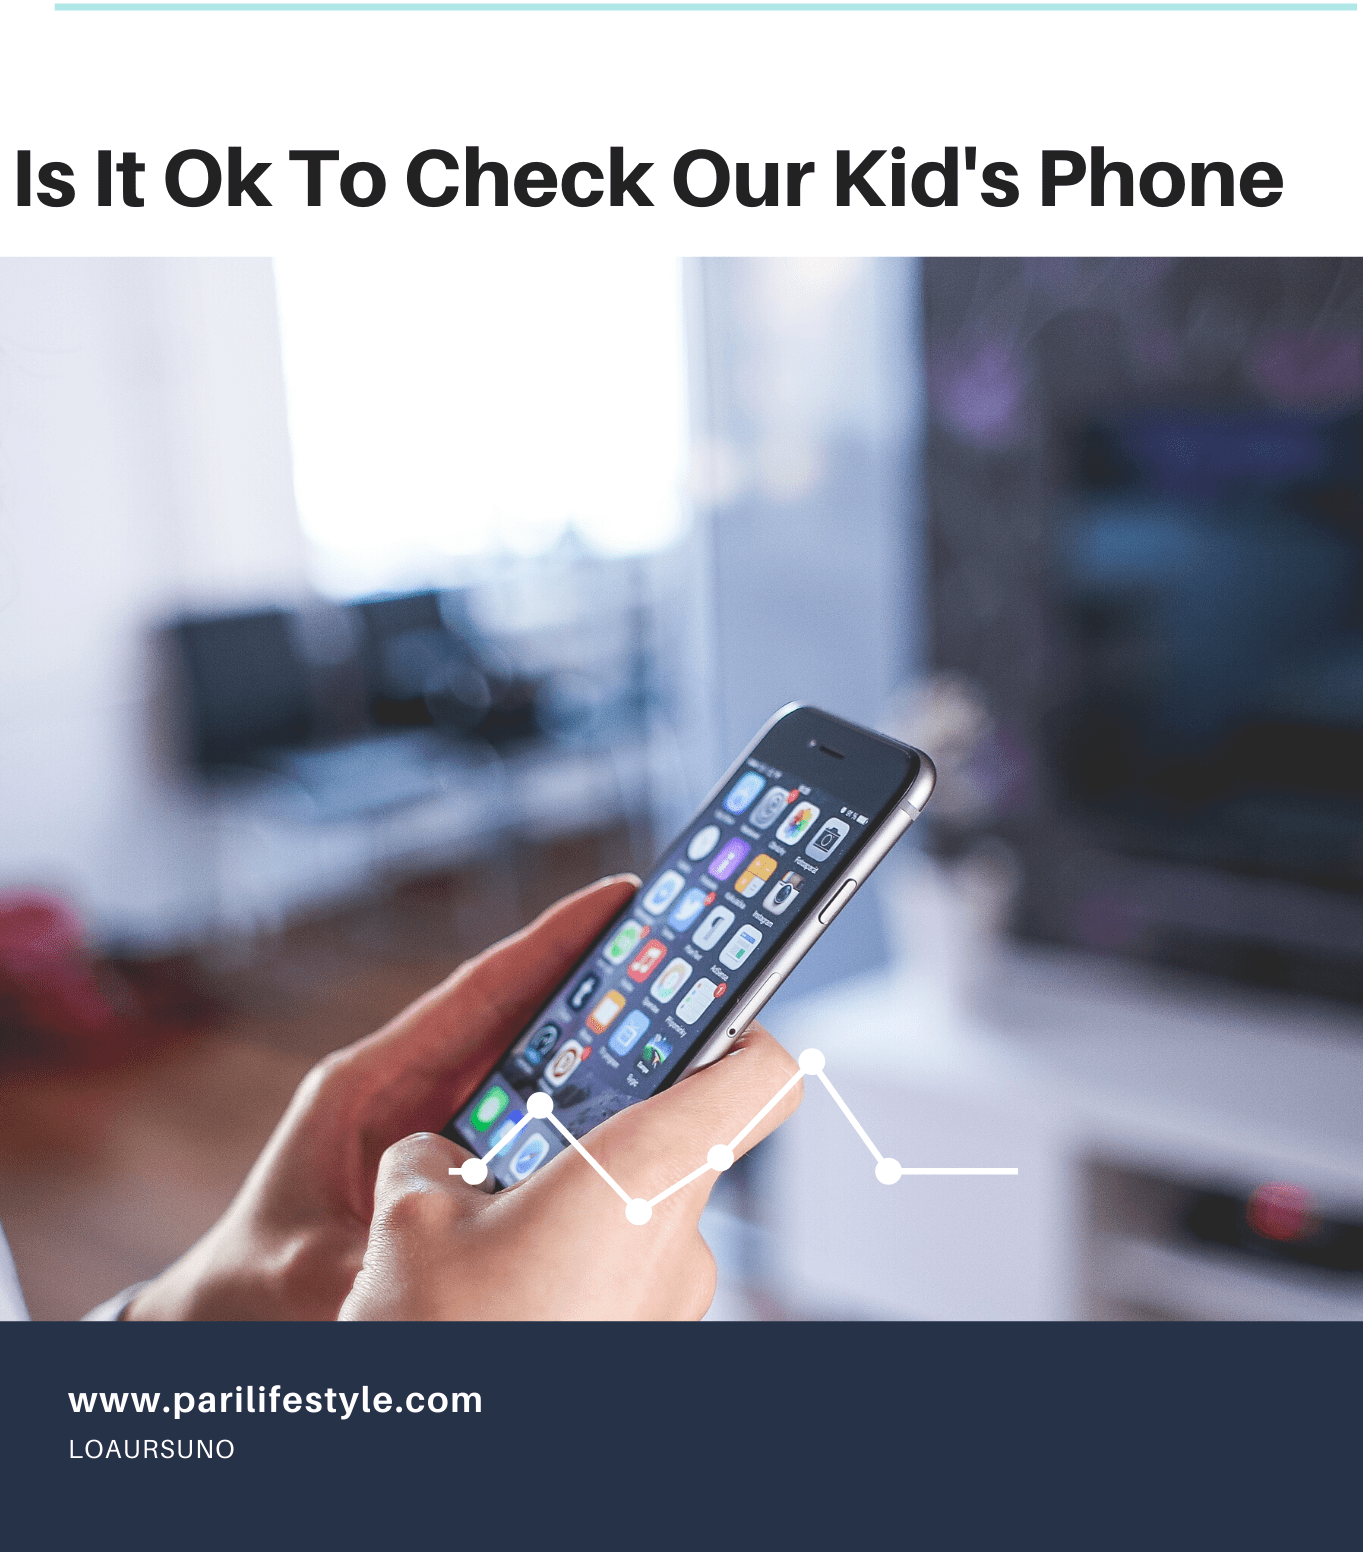 Is It Ok To Check Your Kid's Phone